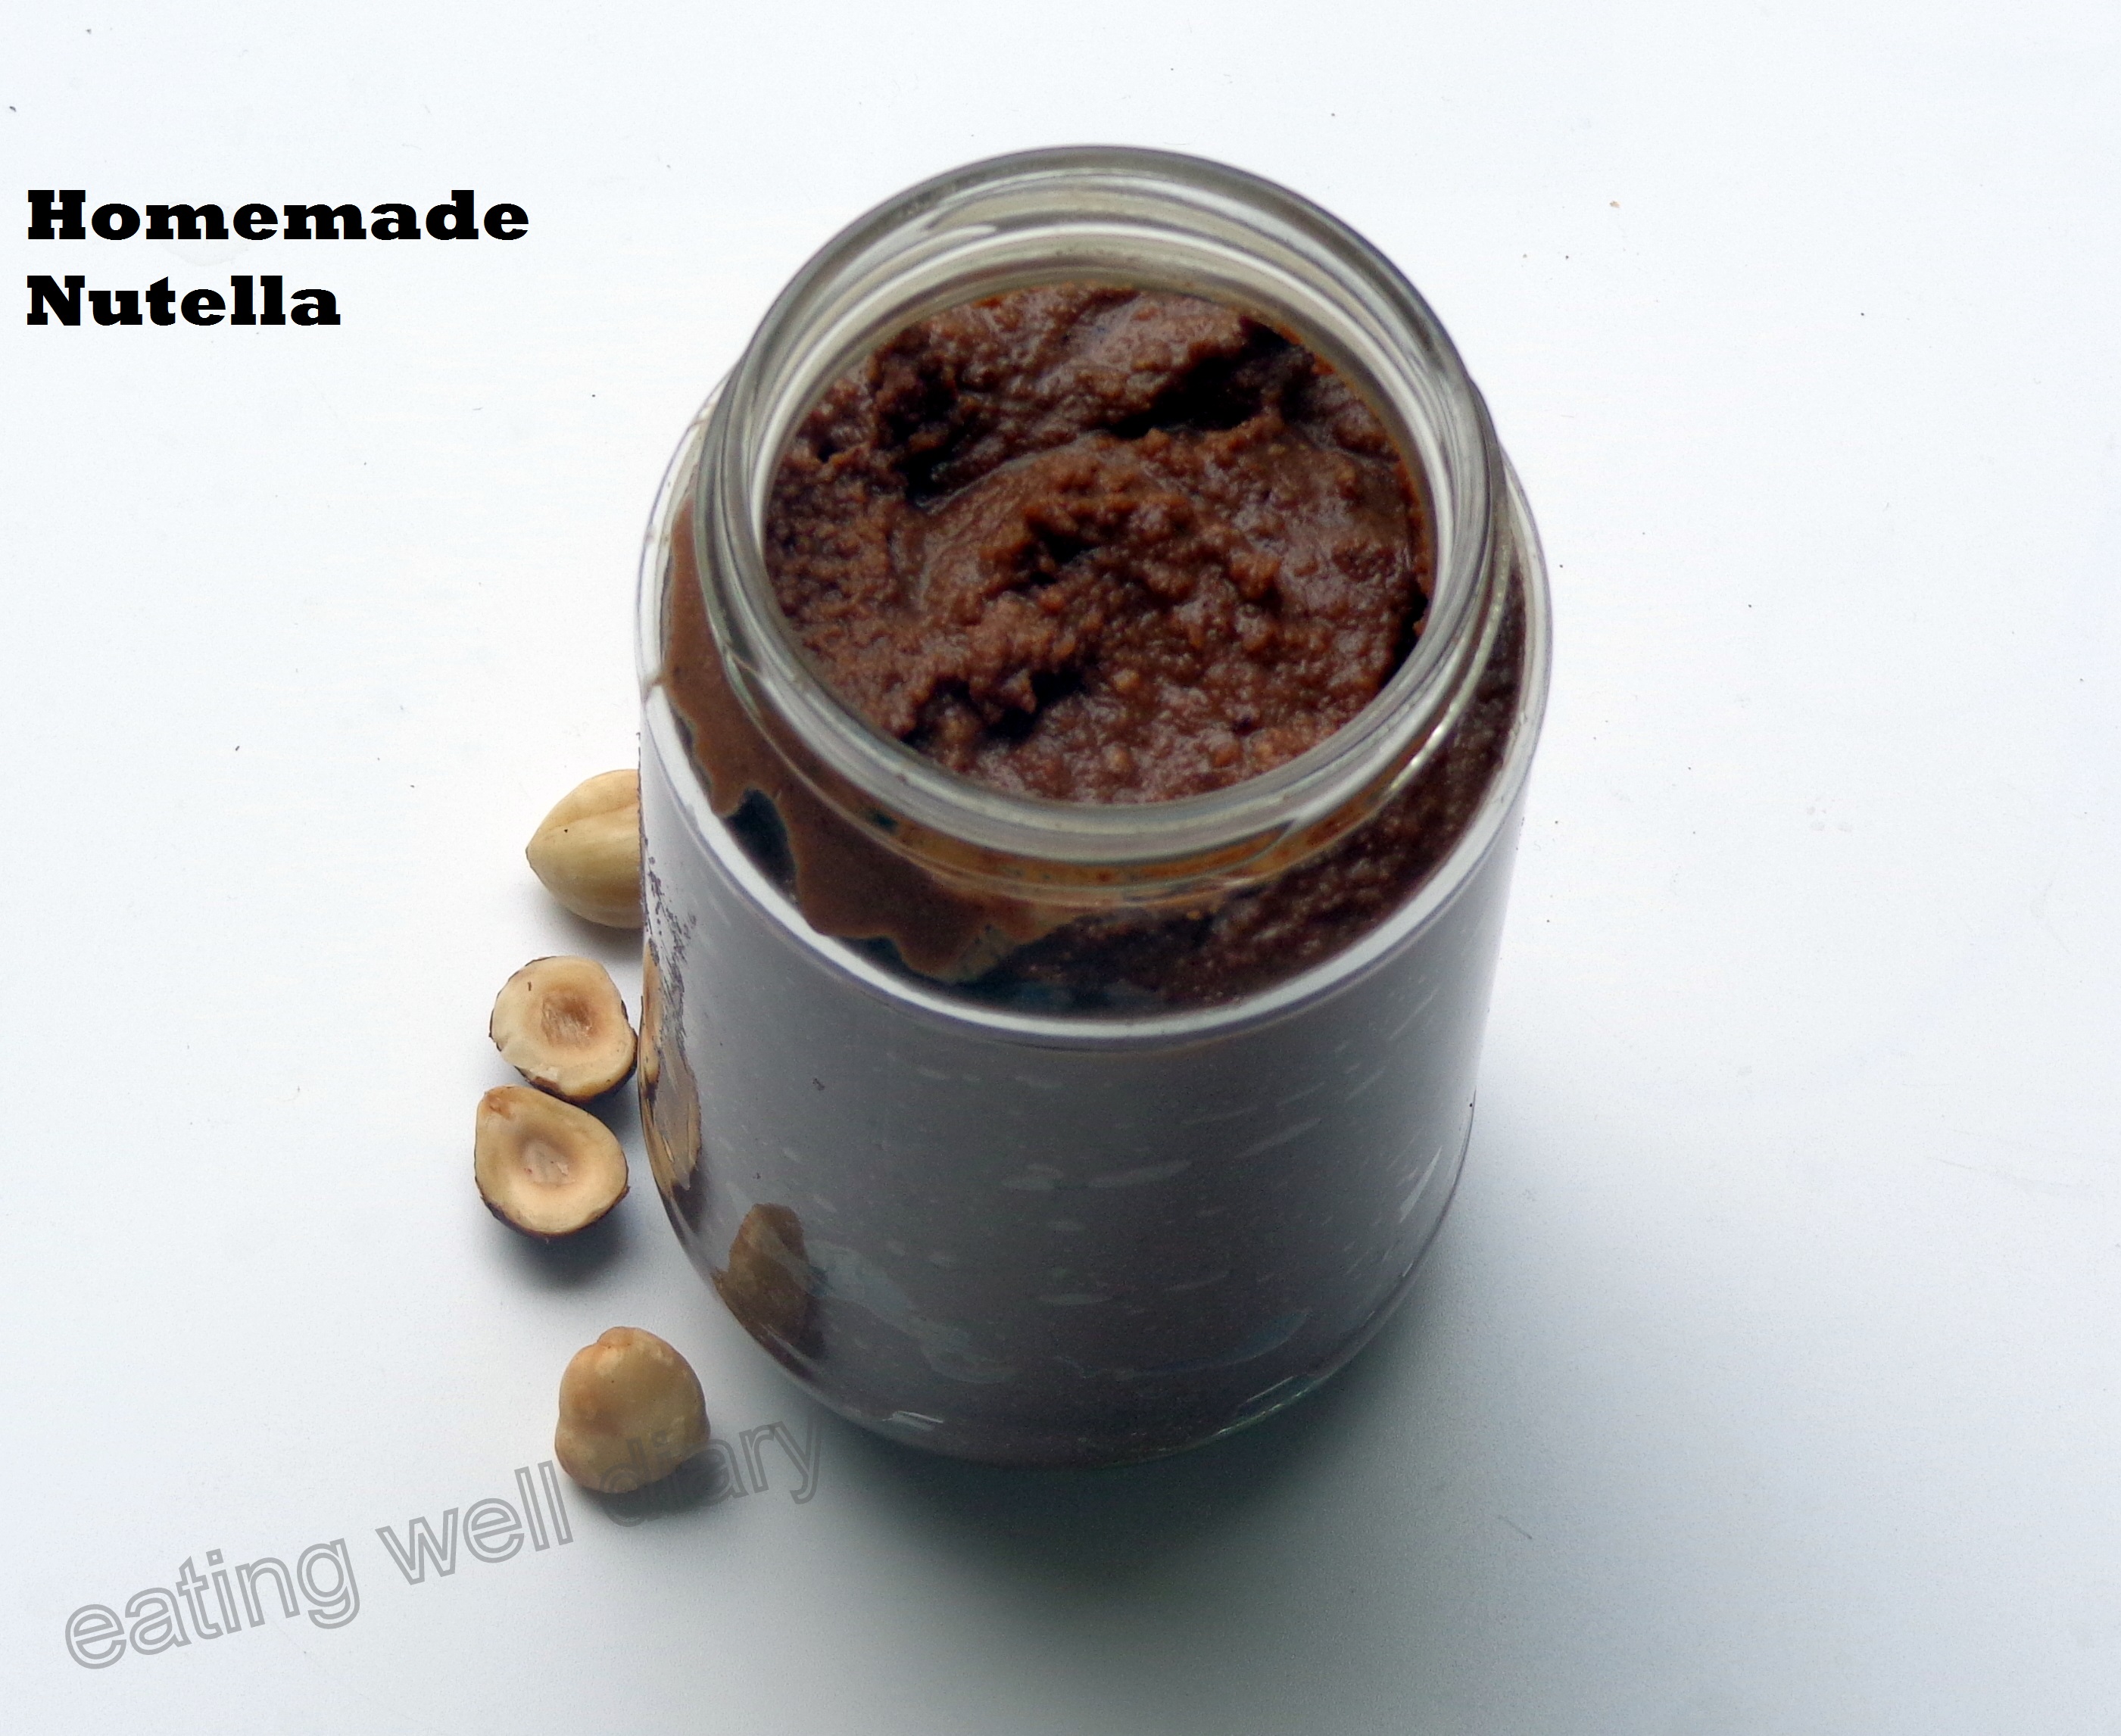 Homemade Nutella with activated hazelnuts